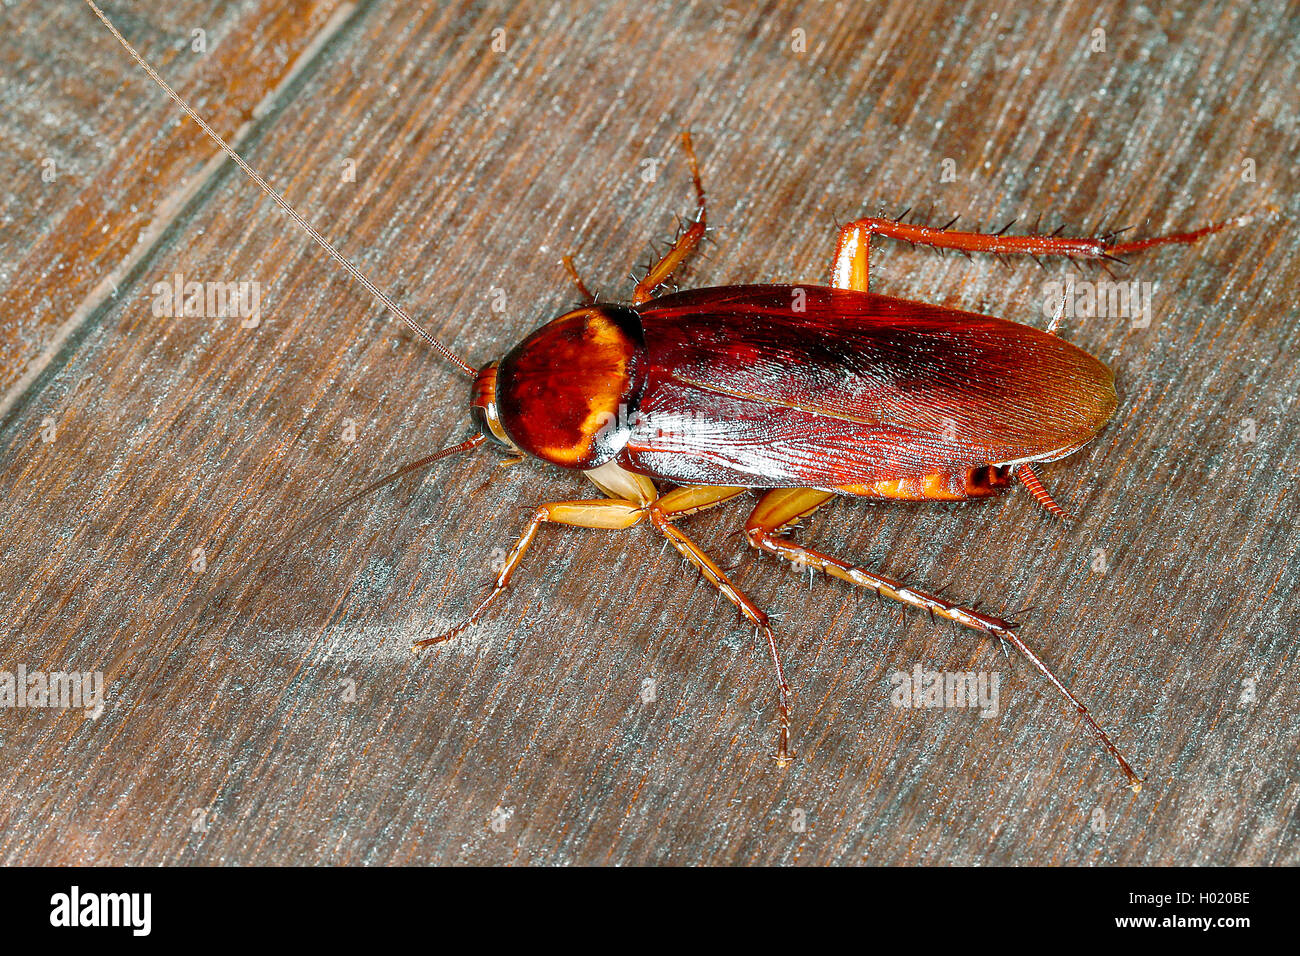 From Cockroaches High Resolution Stock Photography and Images - Alamy